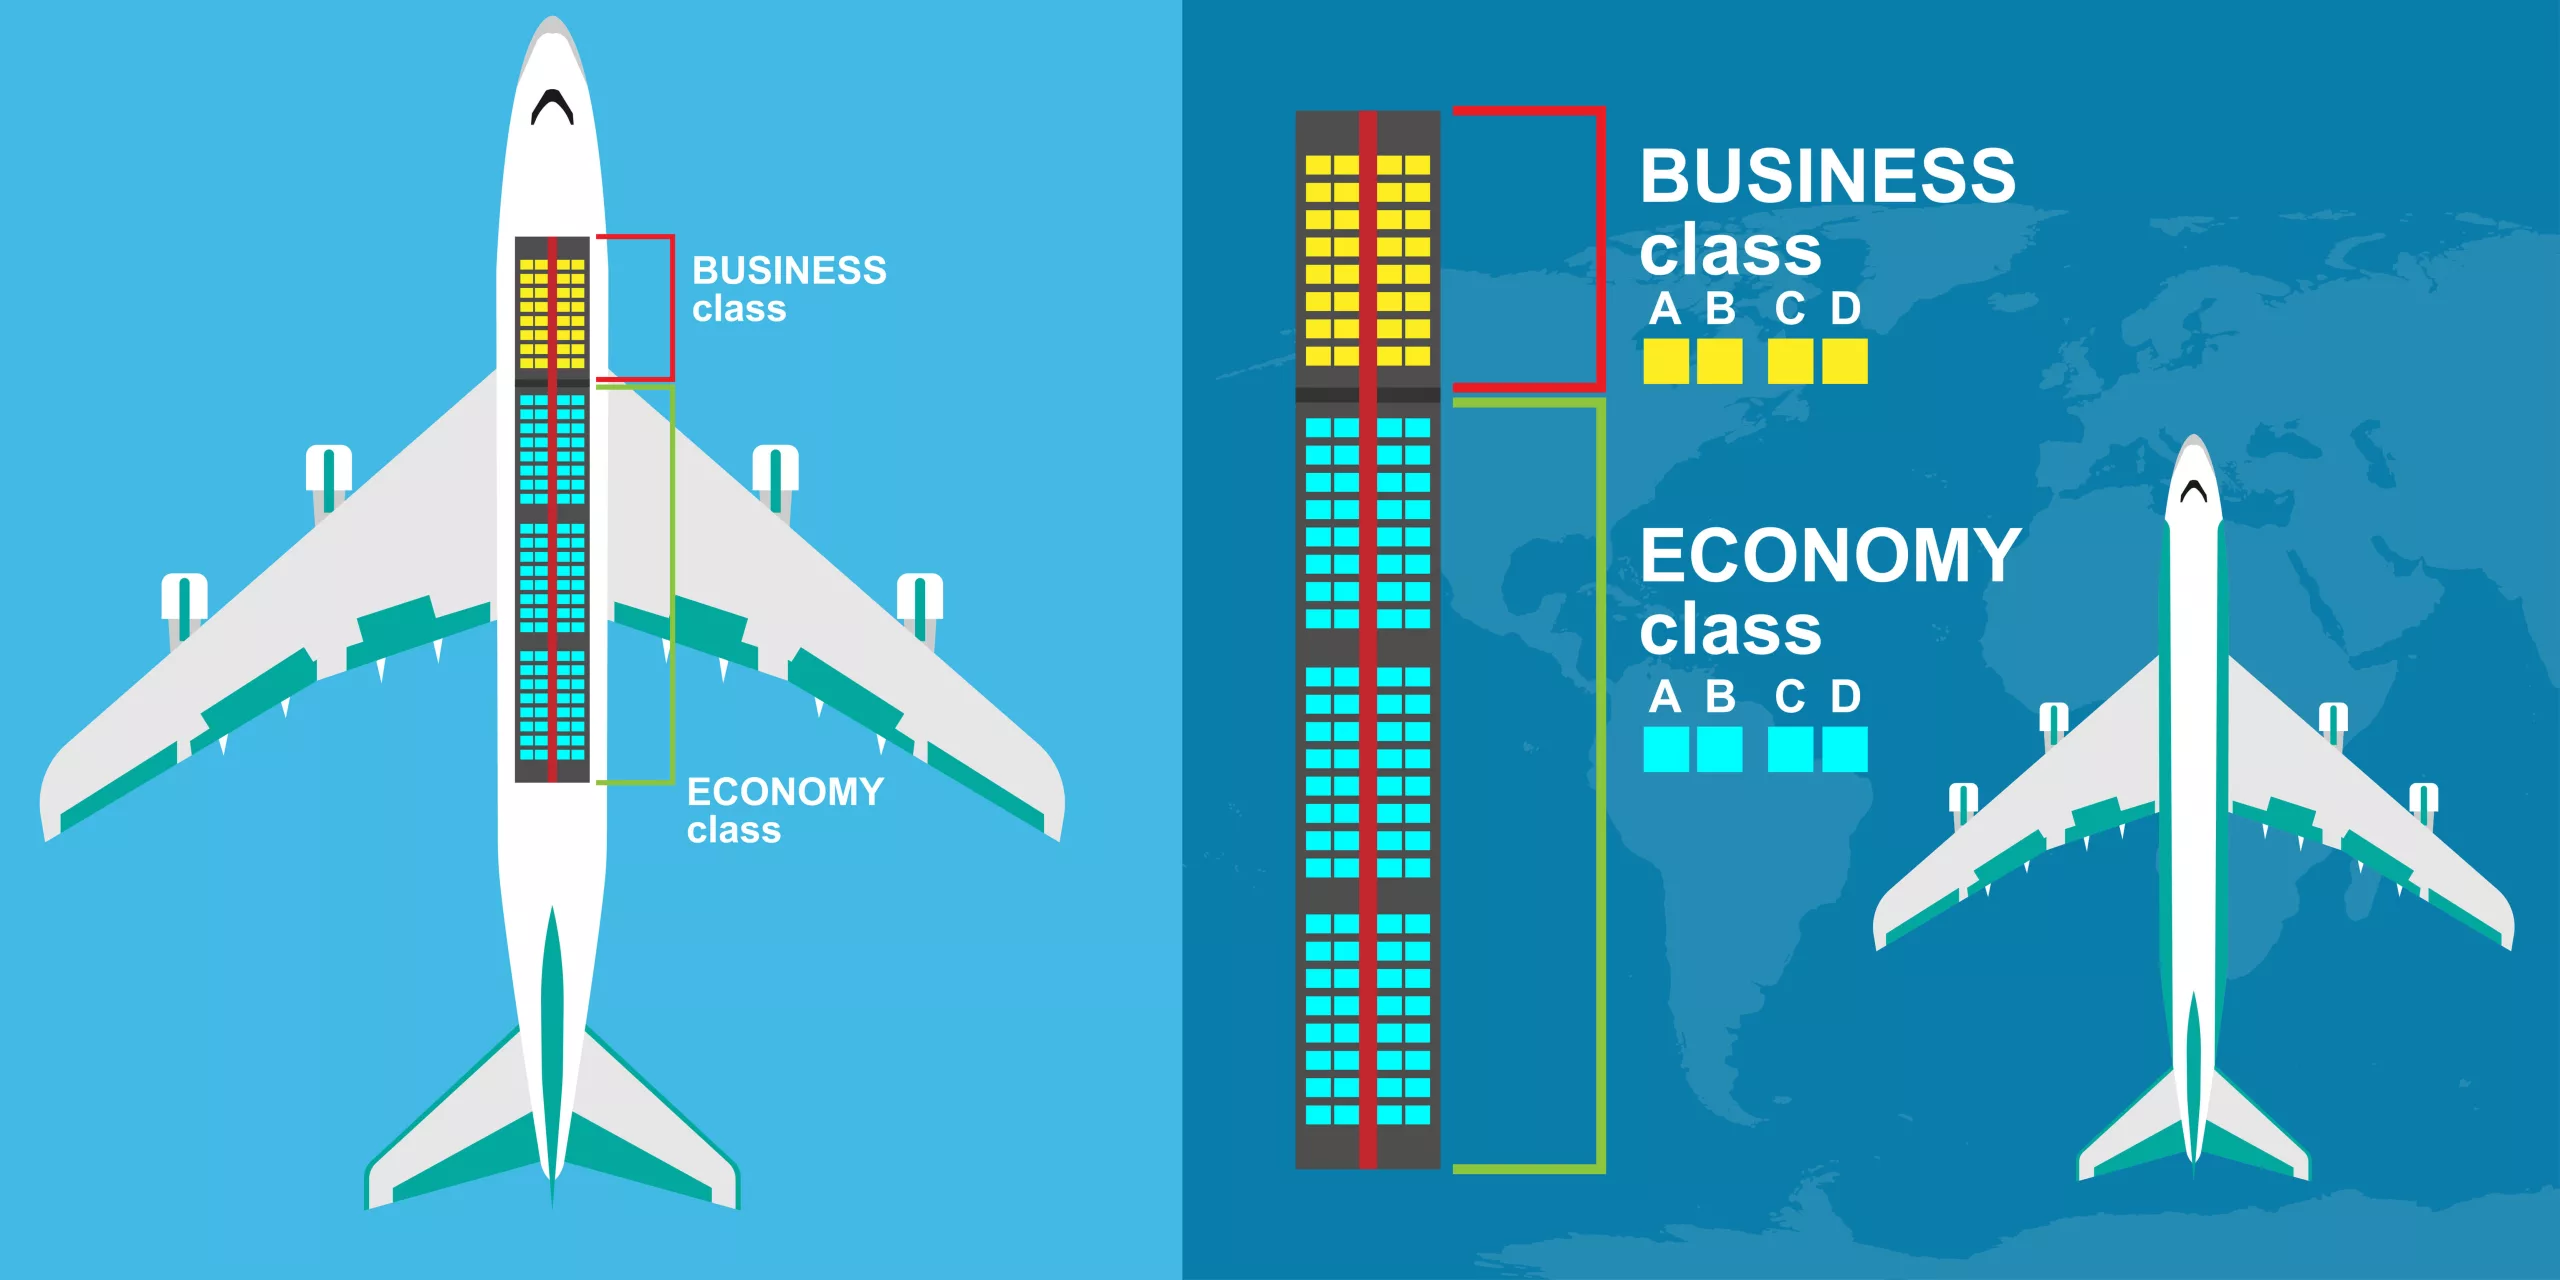 What Is the Difference Between Basic Economy and Main Cabin?